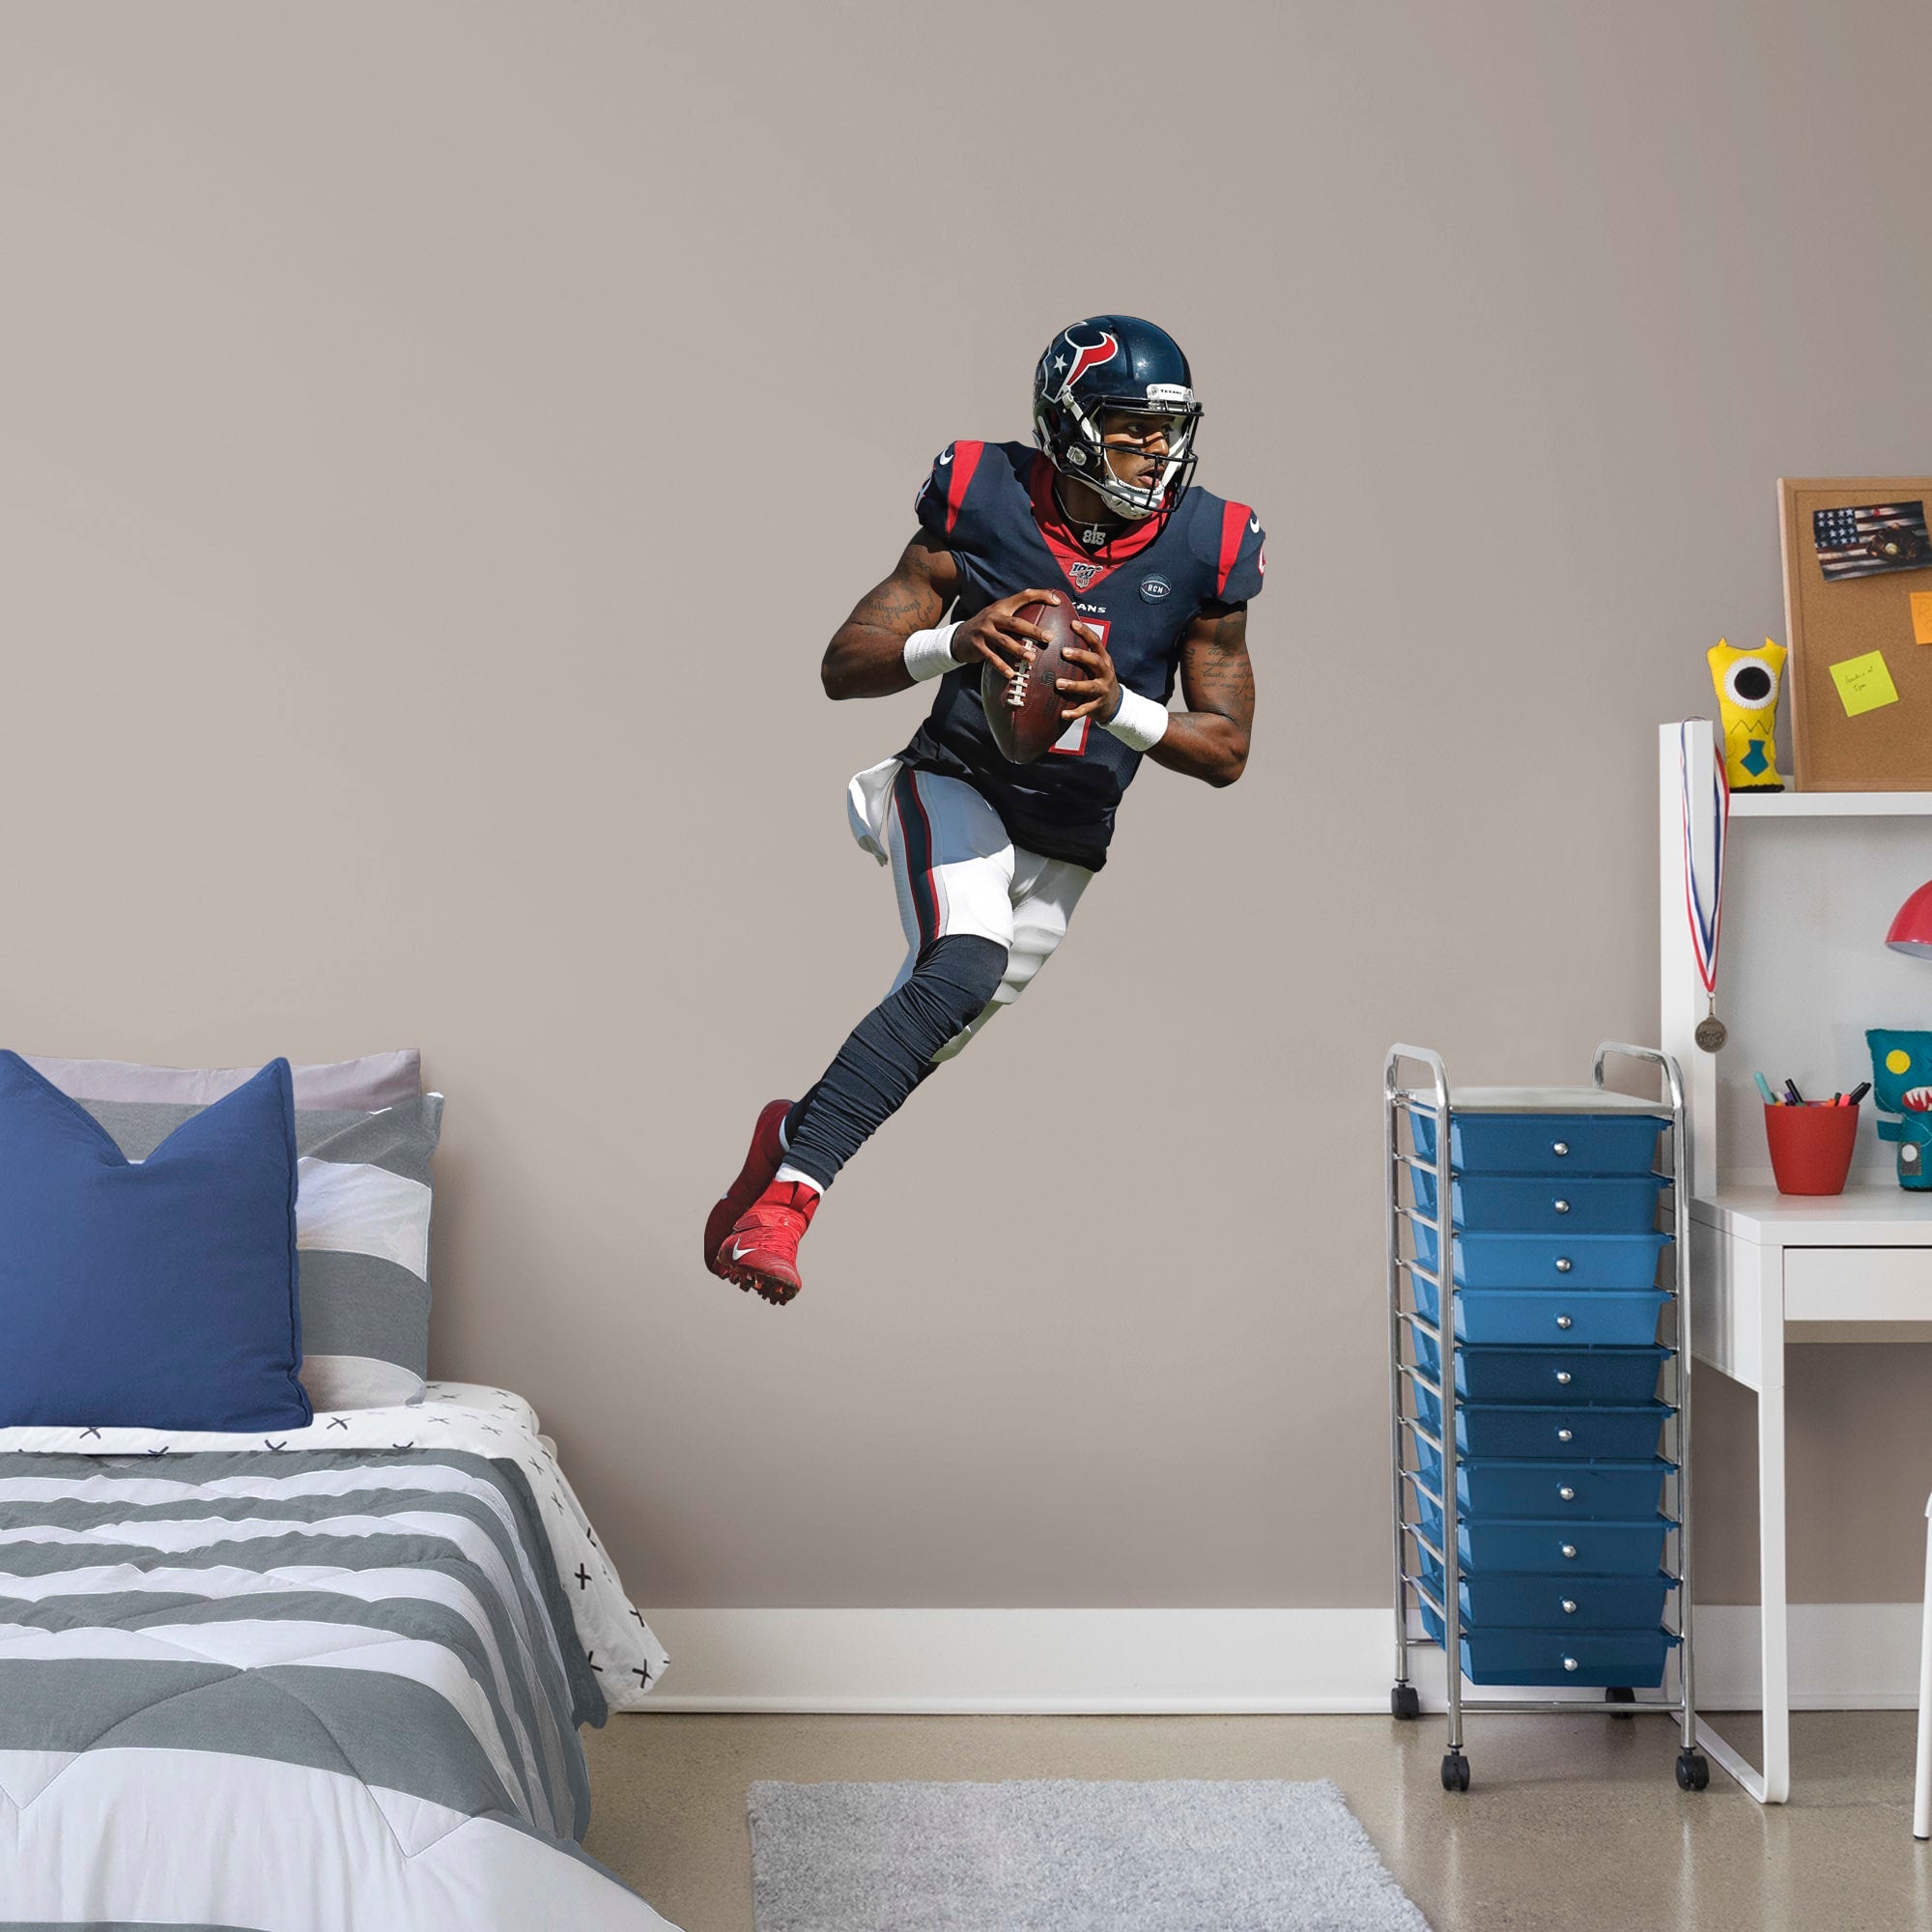 Deshaun Watson for Houston Texans - Officially Licensed NFL Removable Wall Decal Giant Athlete + 2 Decals (29"W x 51"H) by Fathe